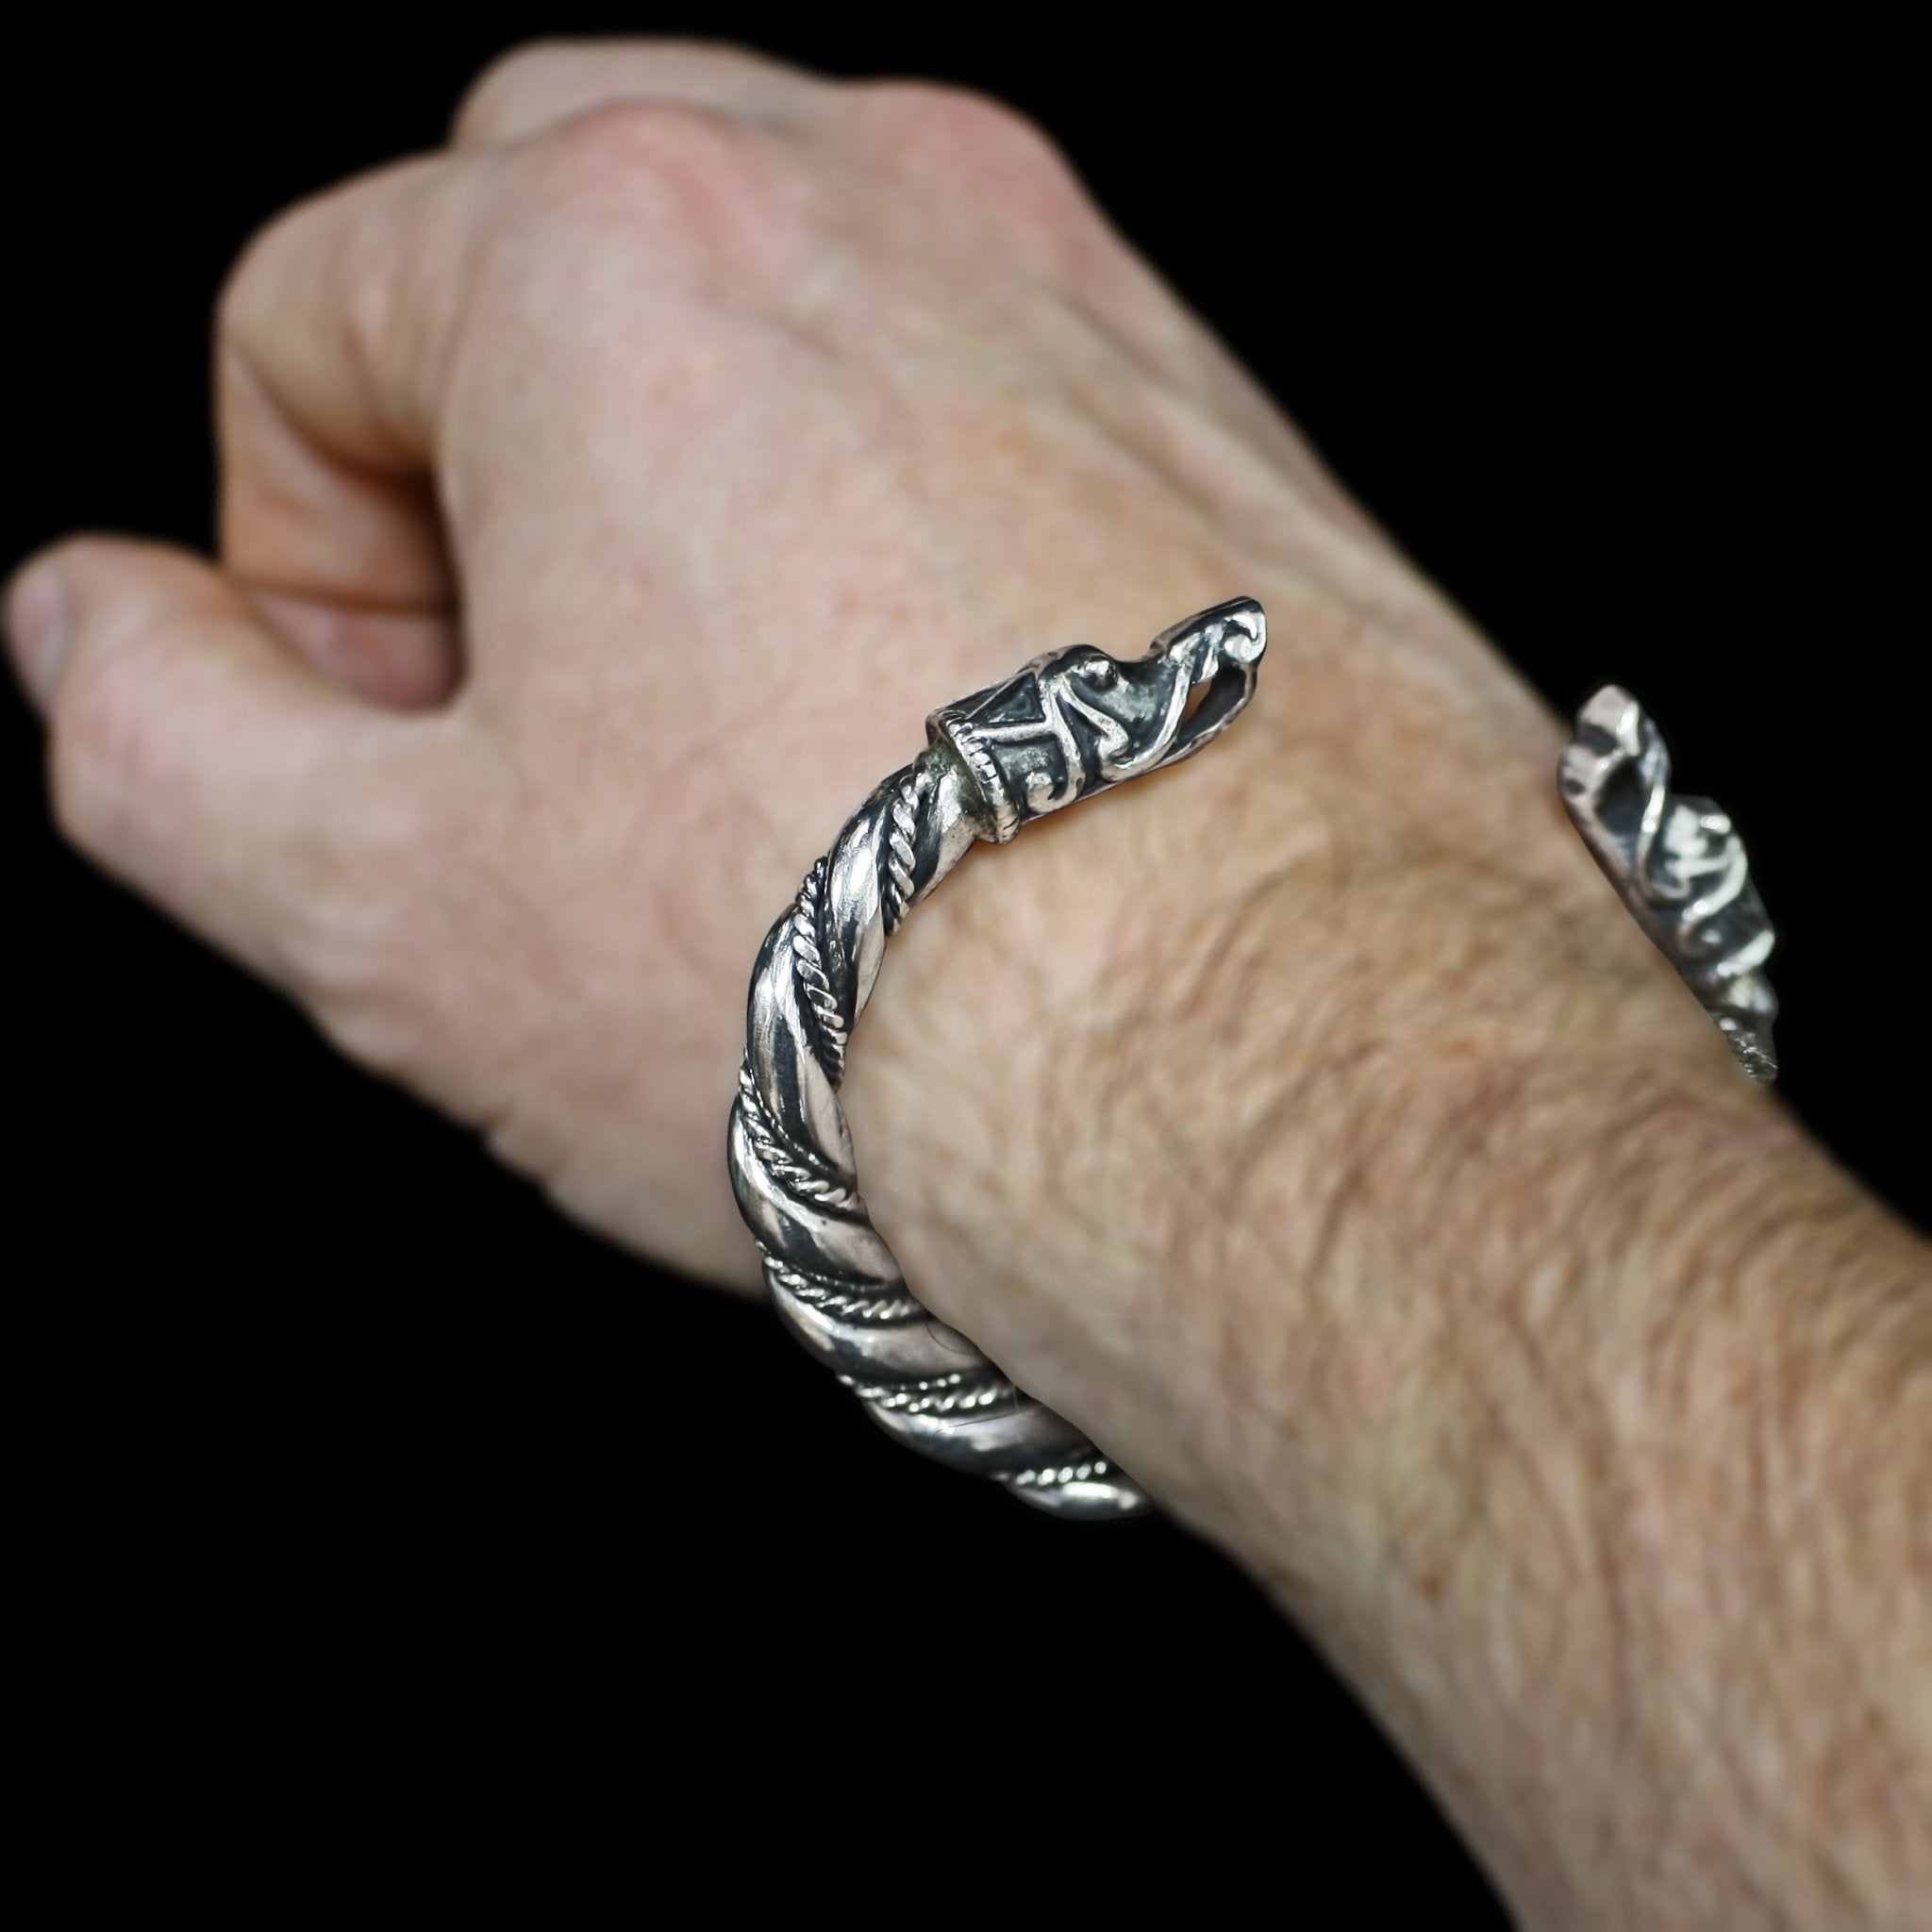 Large Twisted Silver Arm Ring With Gotlandic Dragon Heads on Wrist - Viking Bracelets